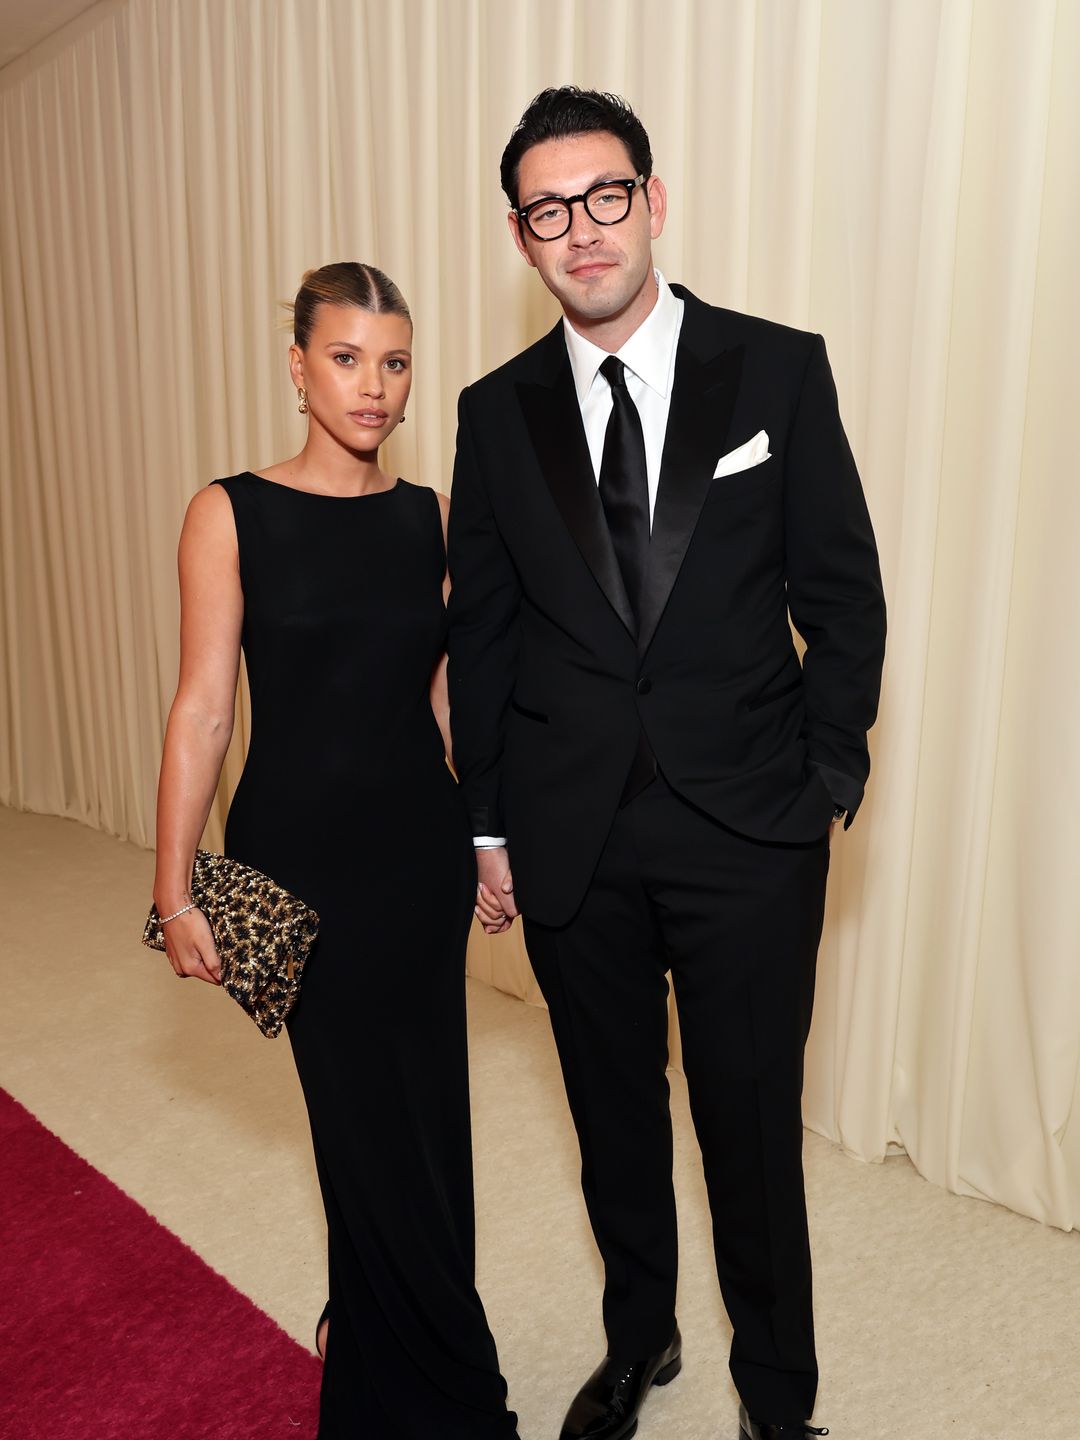 Sofia Richie in a black dress and Elliot Grainge in a suit and glasses